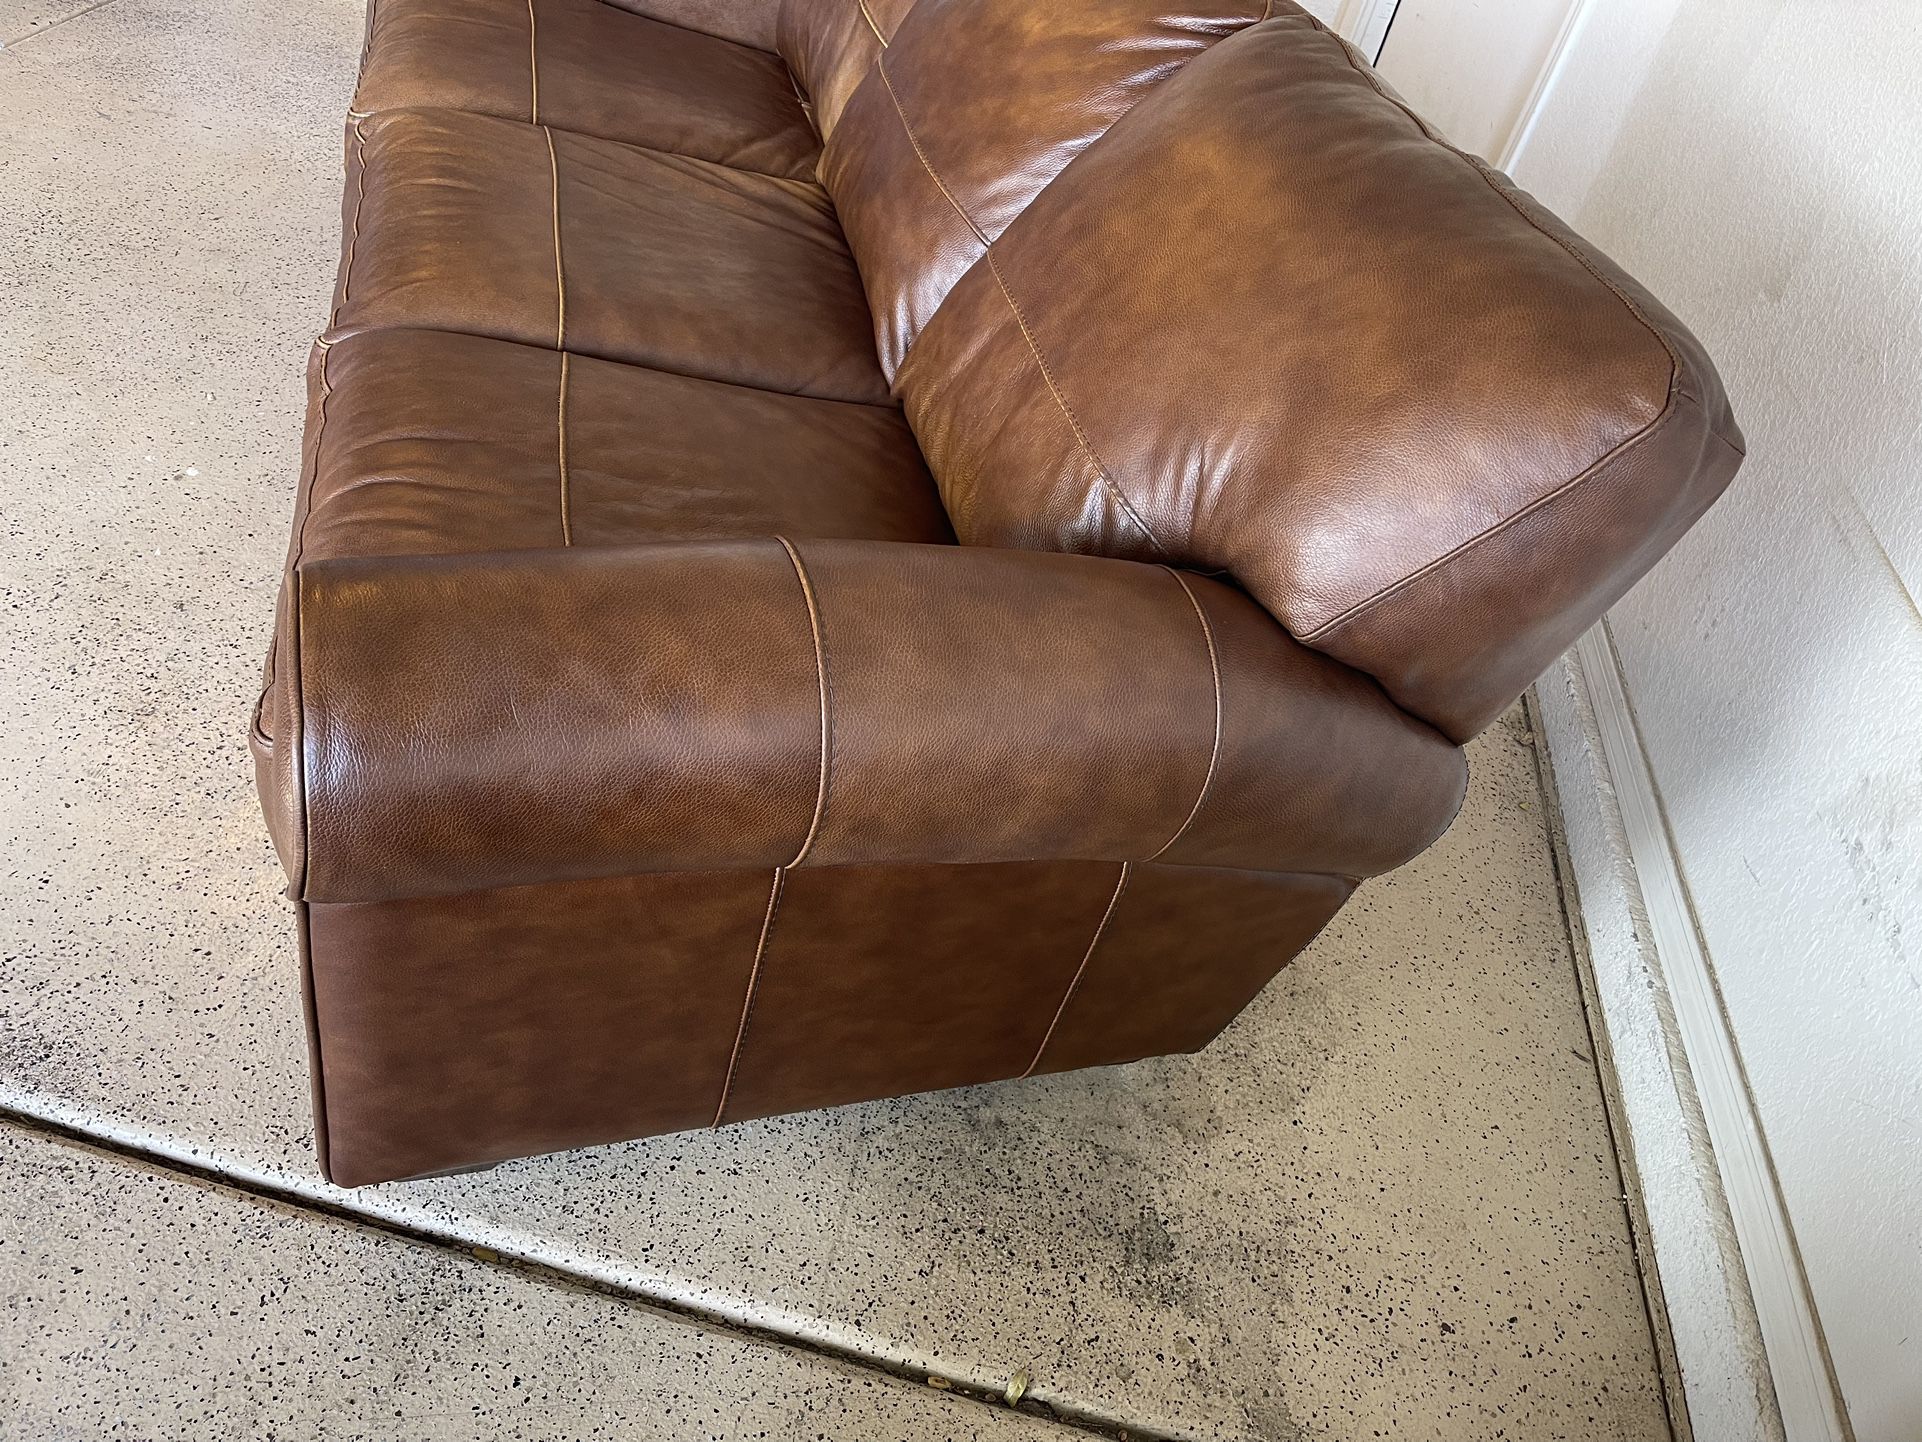 Whiskey Italian Leather Sofa Couch From American Furniture